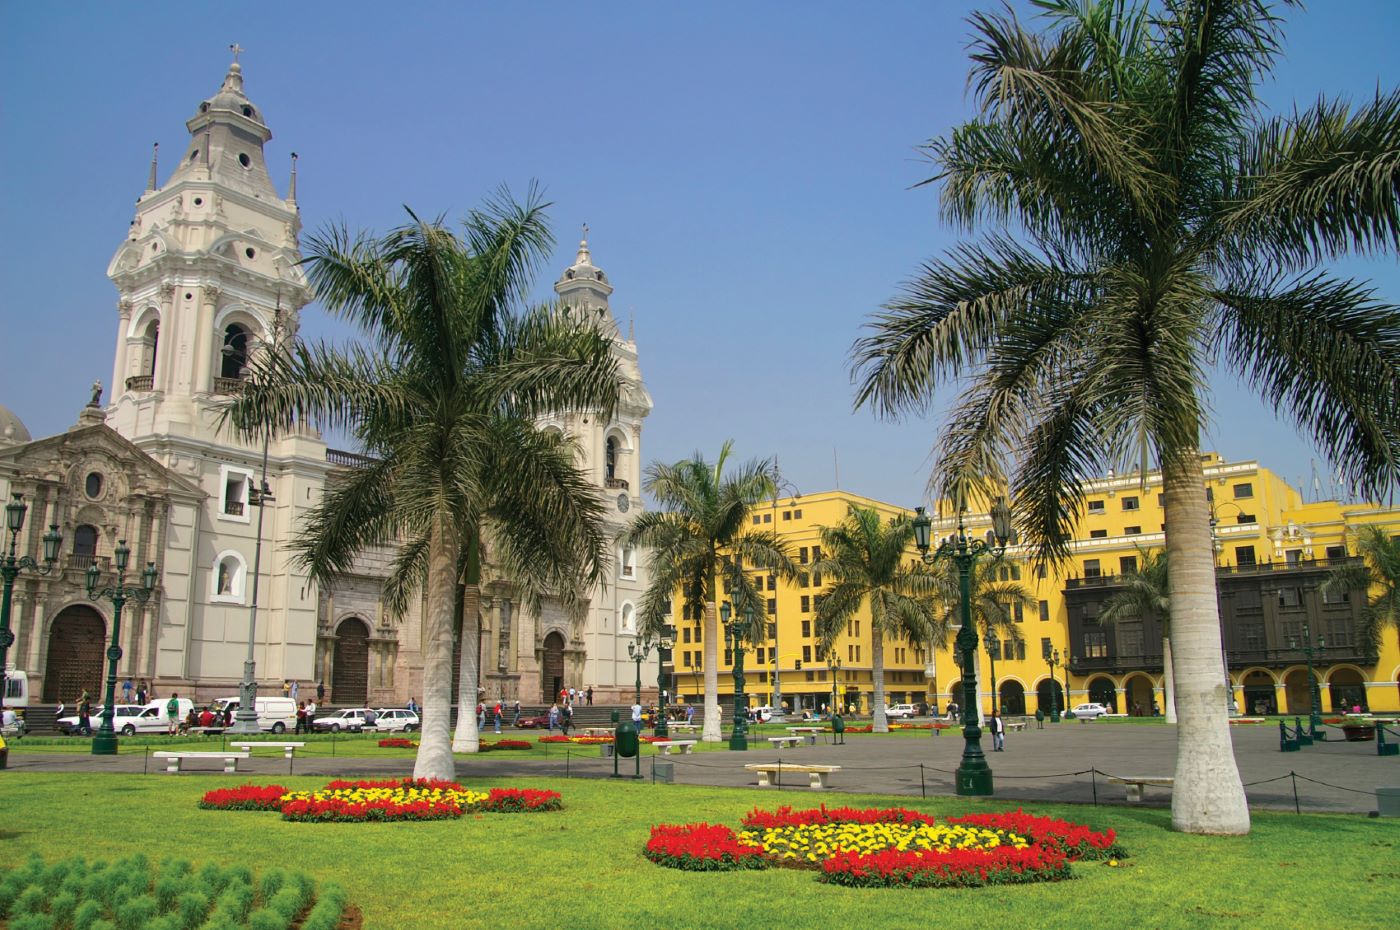 Downtown Lima